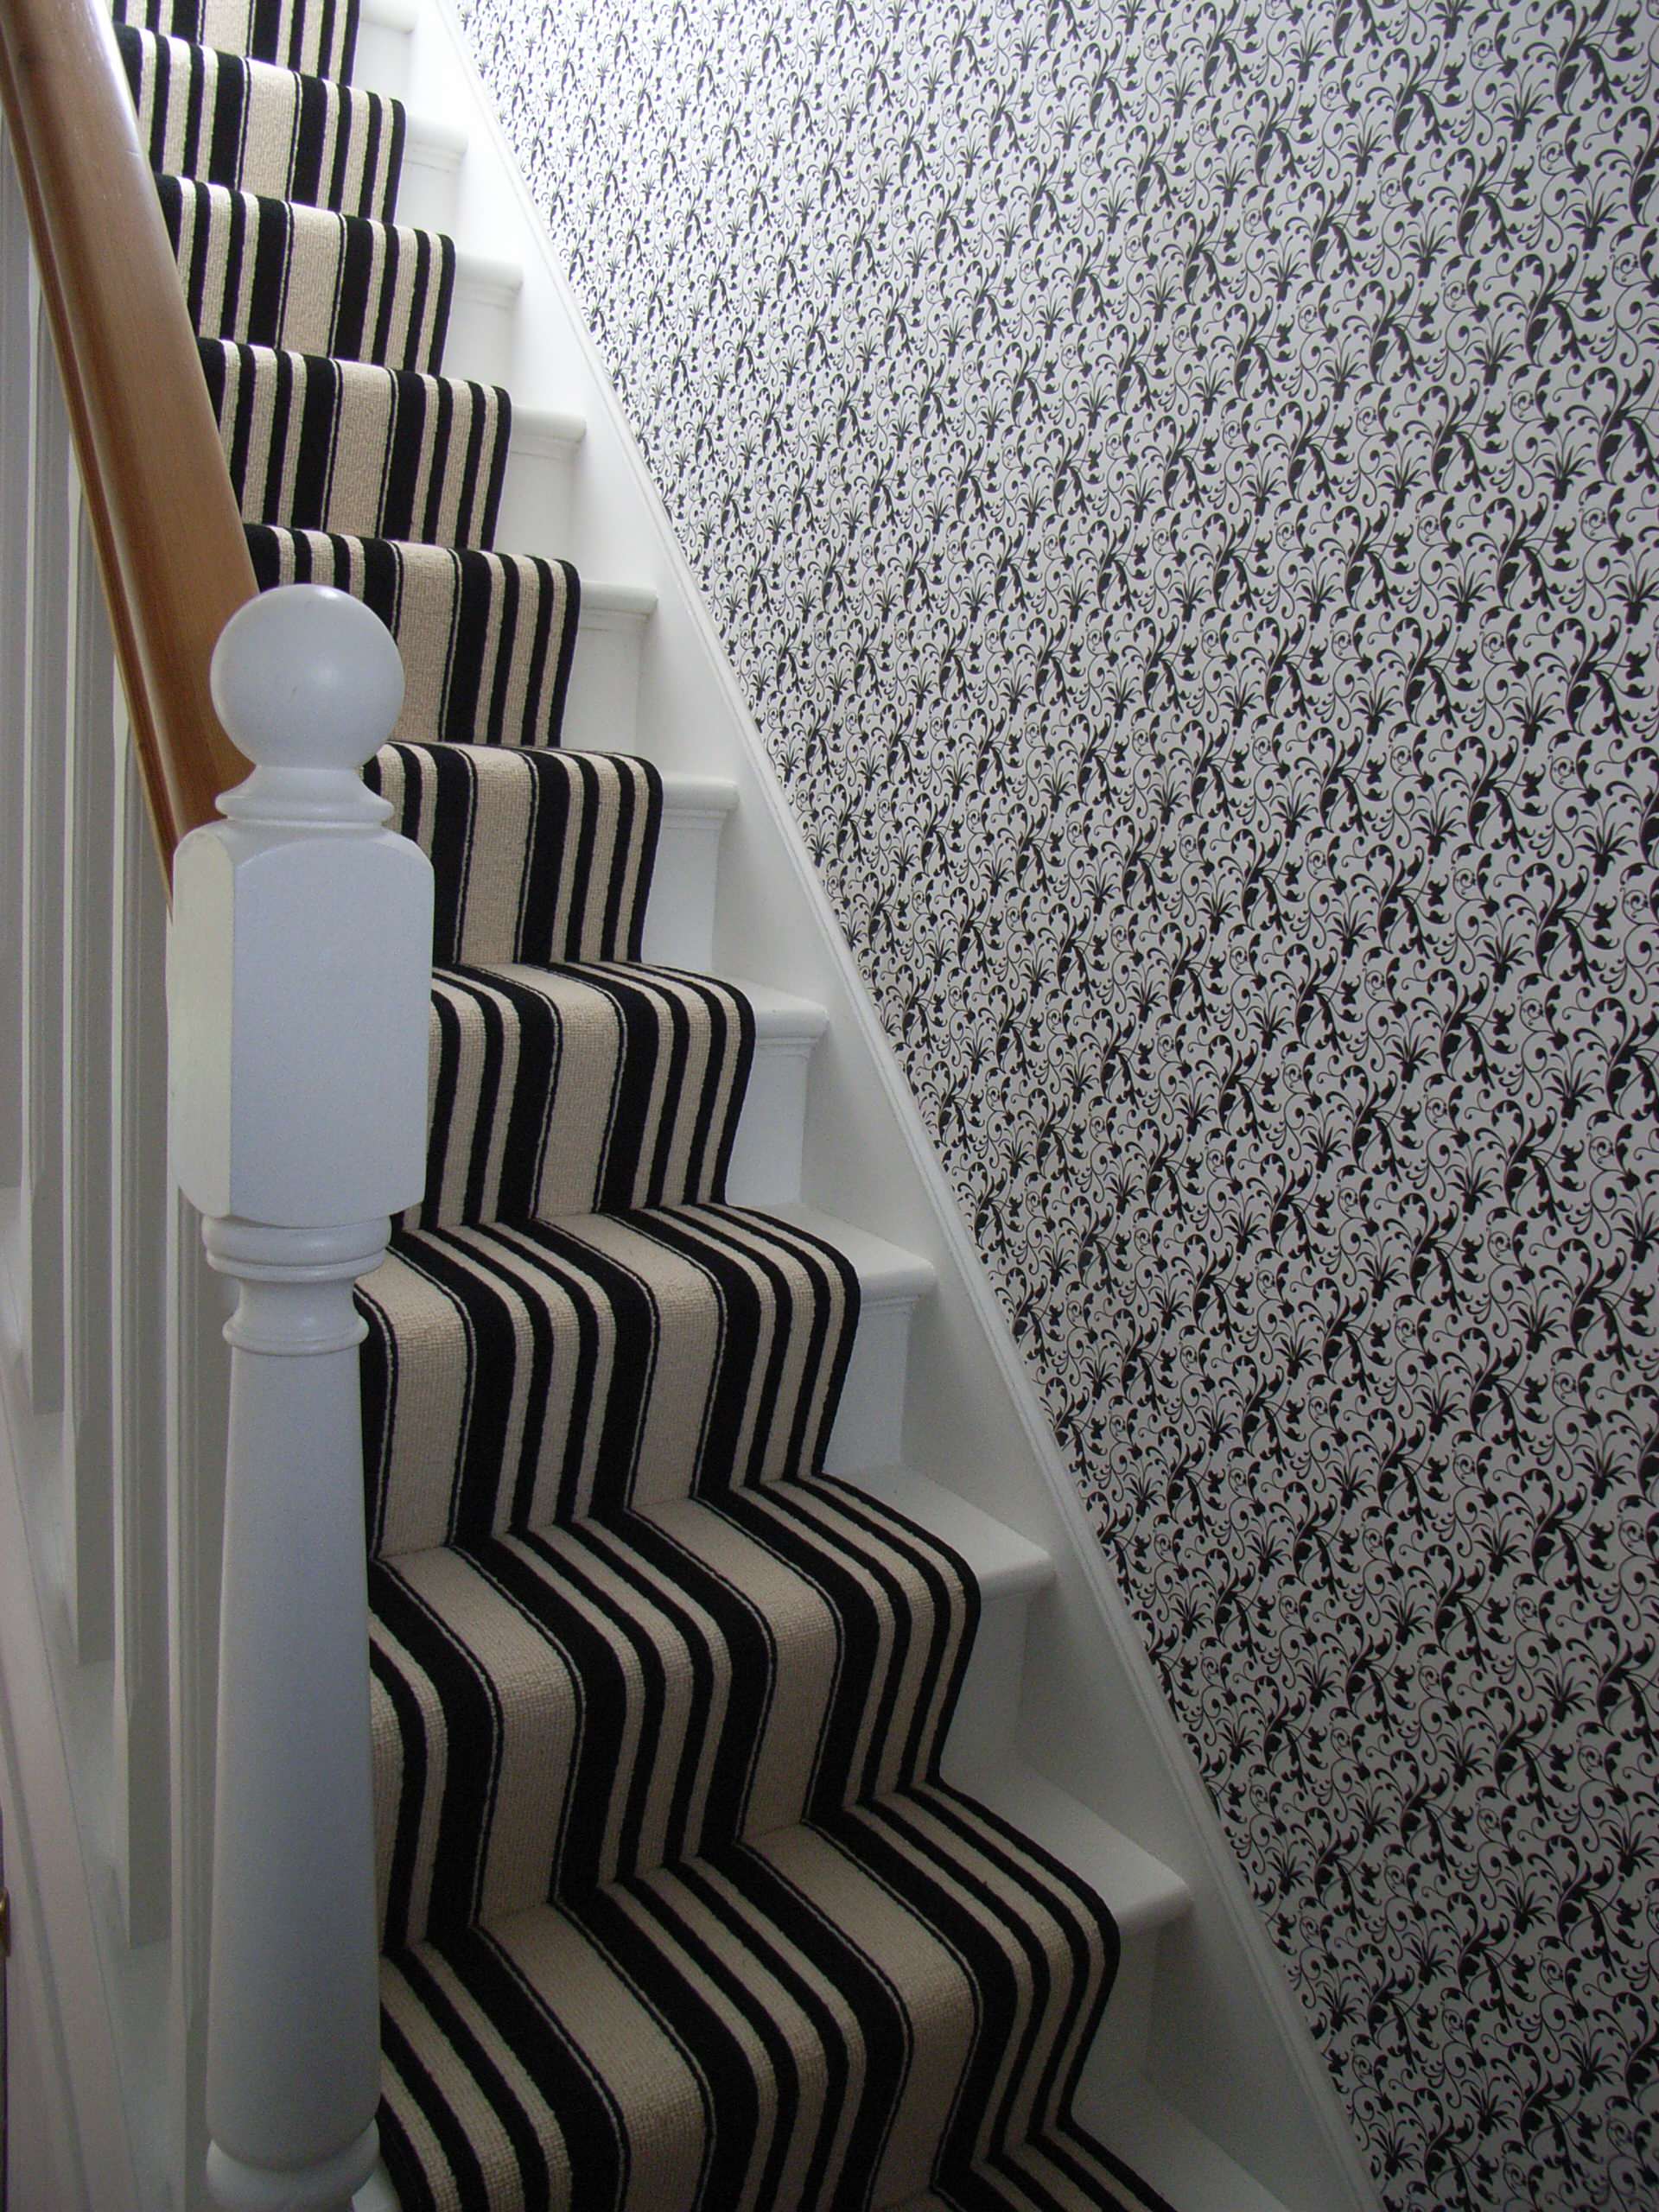 monochrome striped stair carpet runner and patterned wallpaper -  Contemporary - Staircase - Other - by Style Within Limited | Houzz